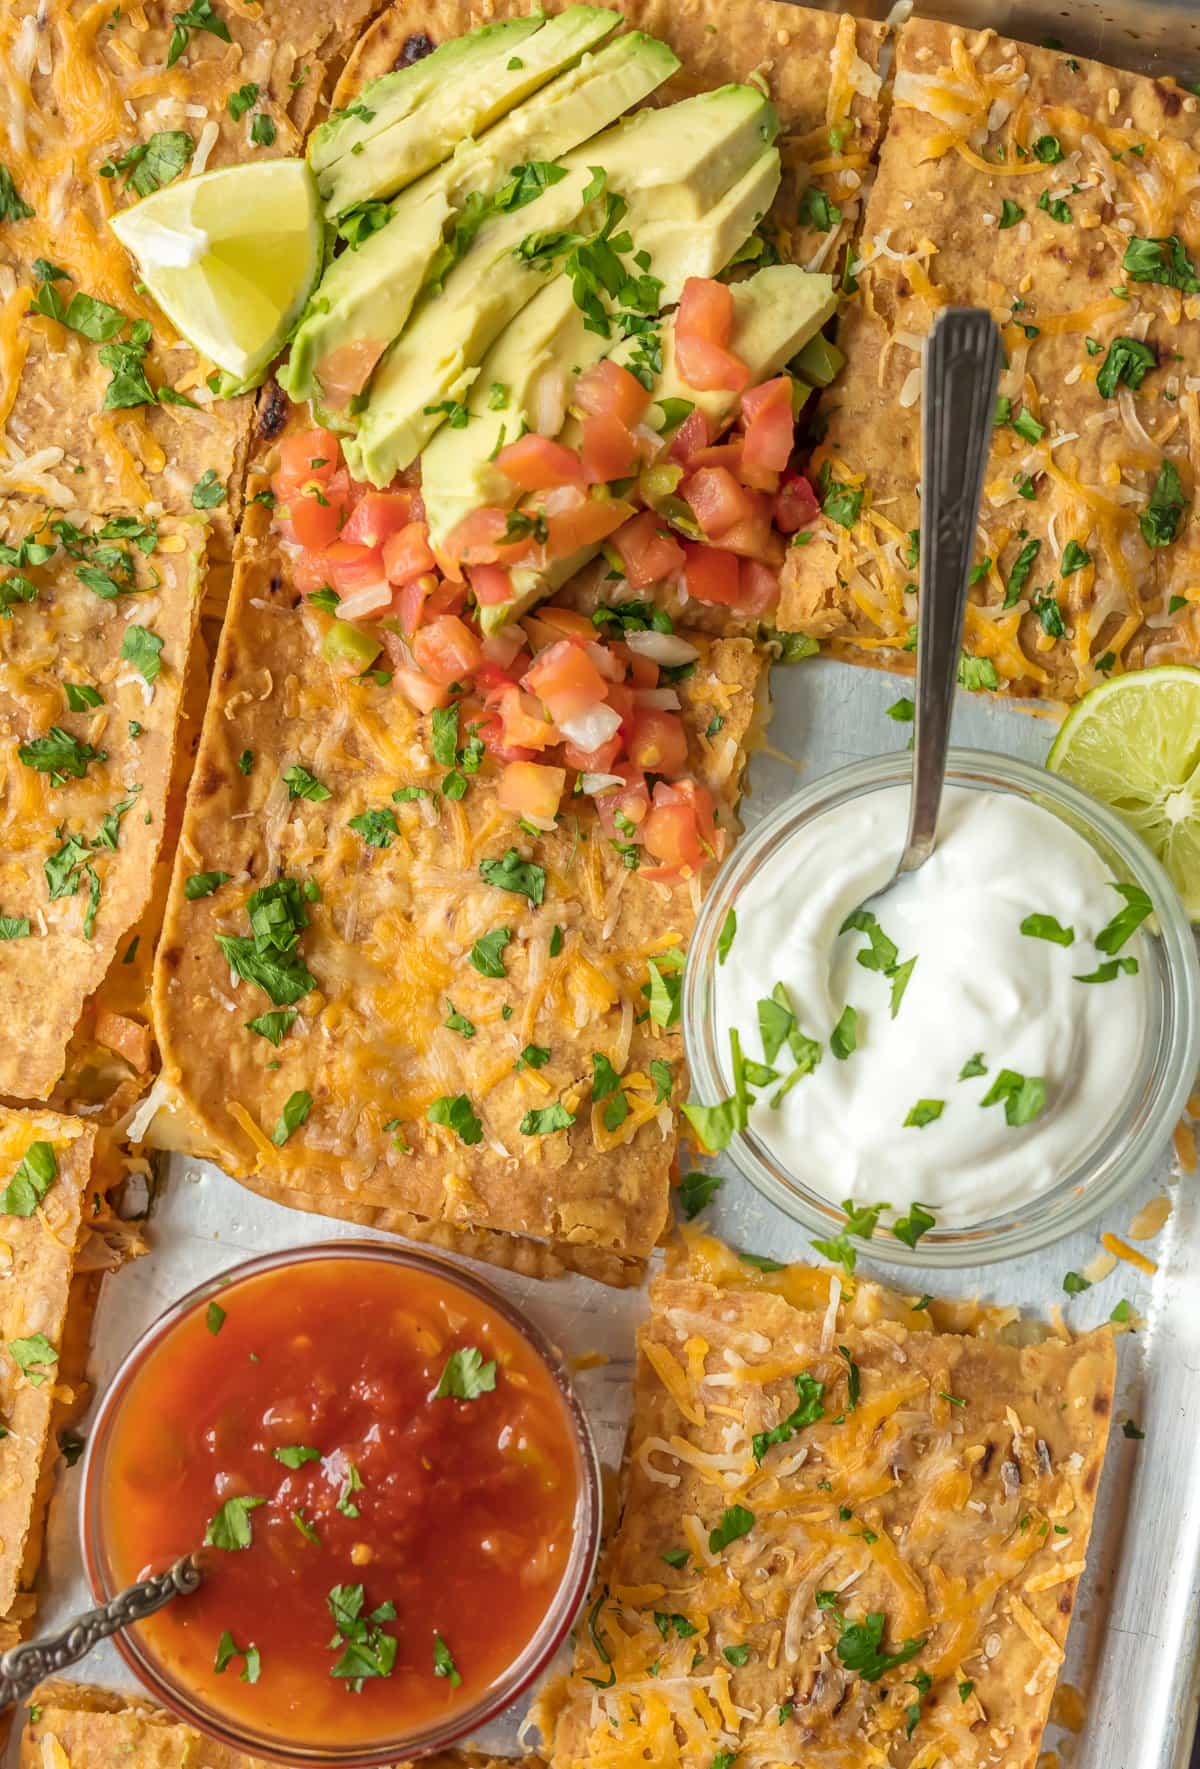 SHEET PAN CHICKEN QUESADILLAS are the easiest and best way to make delicious quesadillas for a crowd! These baked quesadillas can be made with any filling and toppings, and are sure to please even the pickiest eaters.